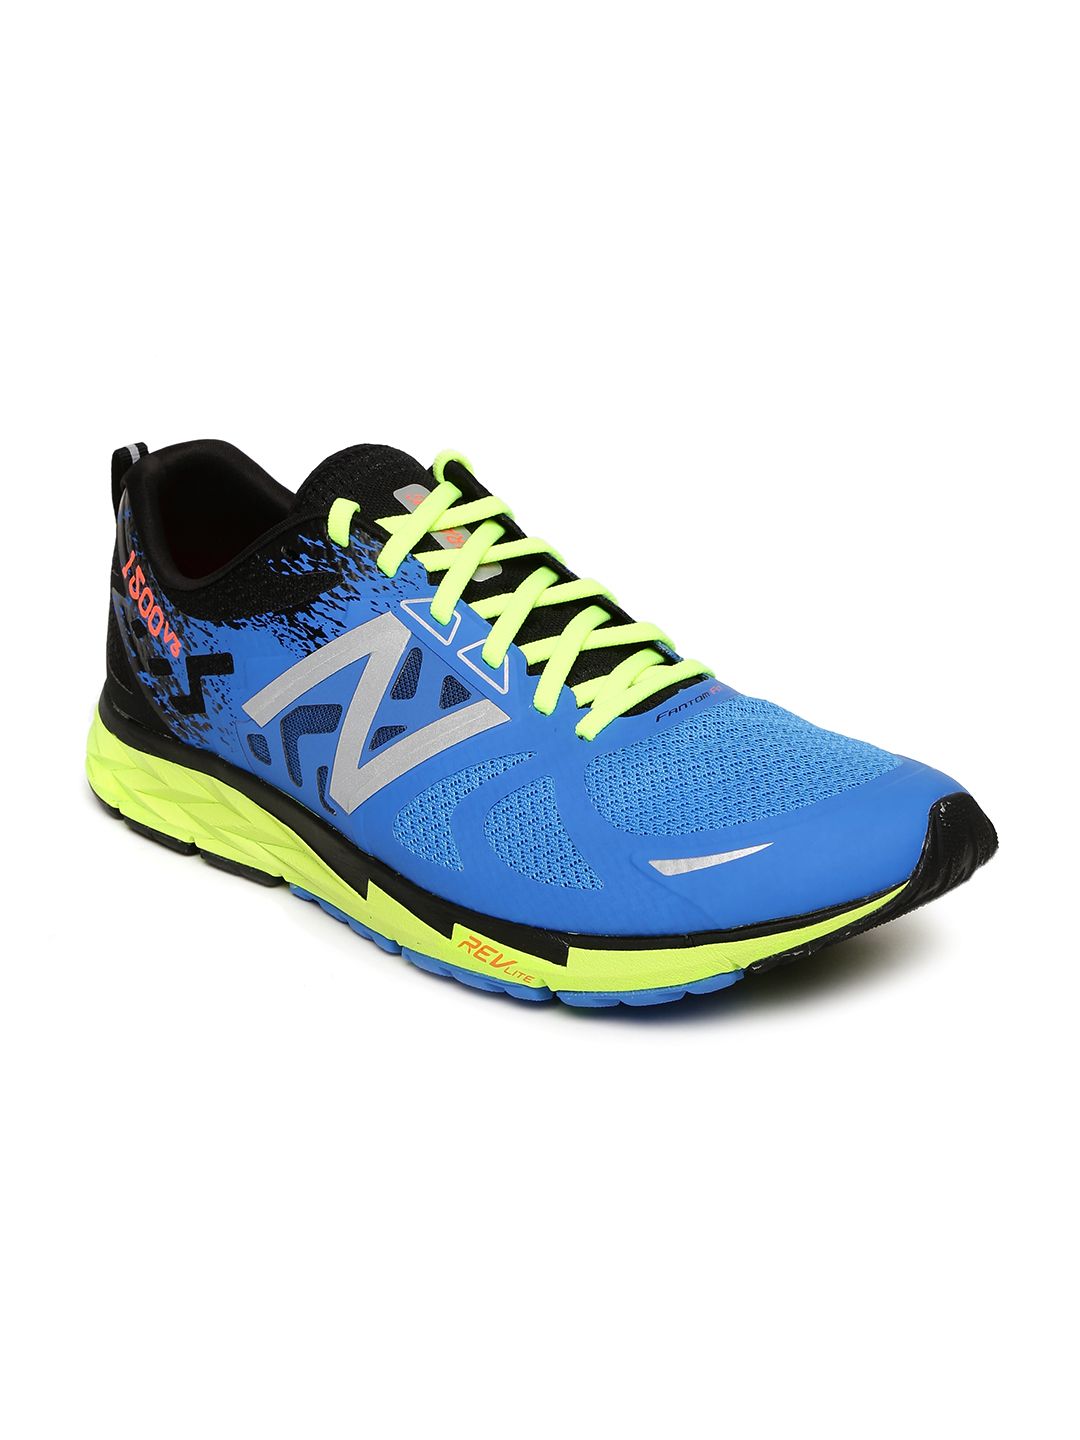 New Balance 390 Blue Running Shoes for Men online in India at Best ...